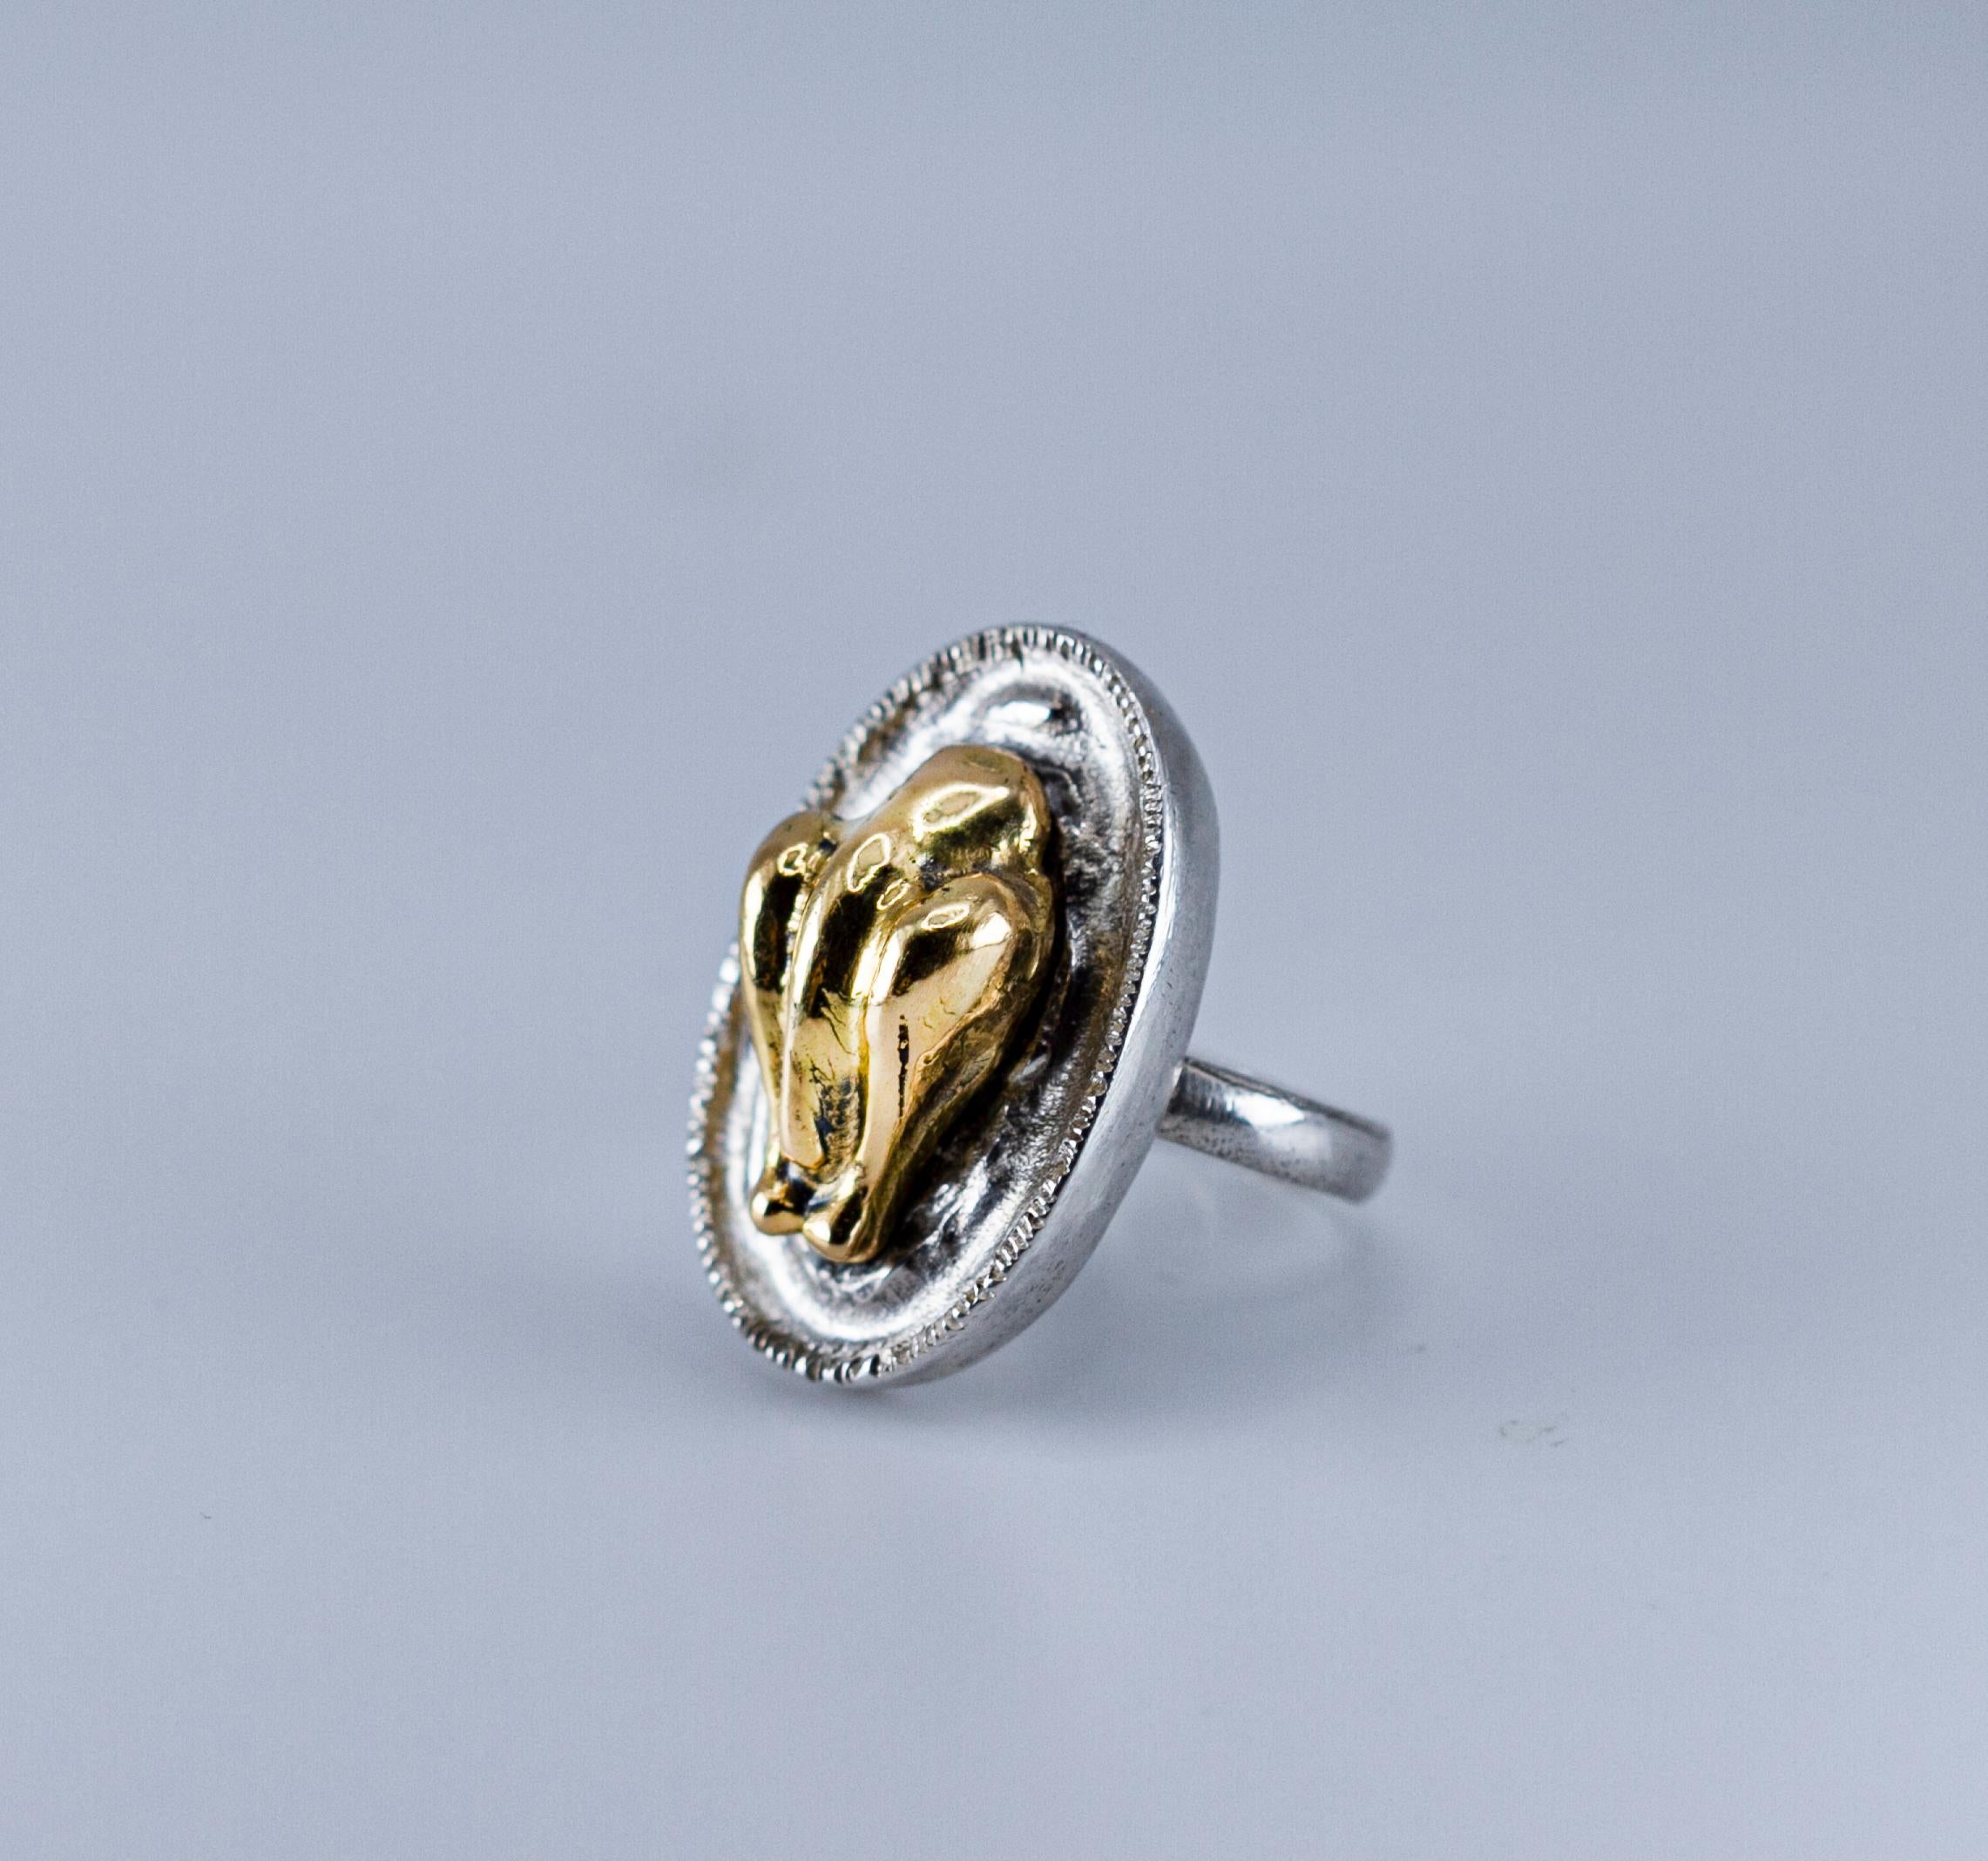 This ring is a one of a kind contemporary jewellery hand sculpted by the French jeweller Binliang Alexander Peng.

The jewellery artist often uses memories of her childhood to create unique pieces.
